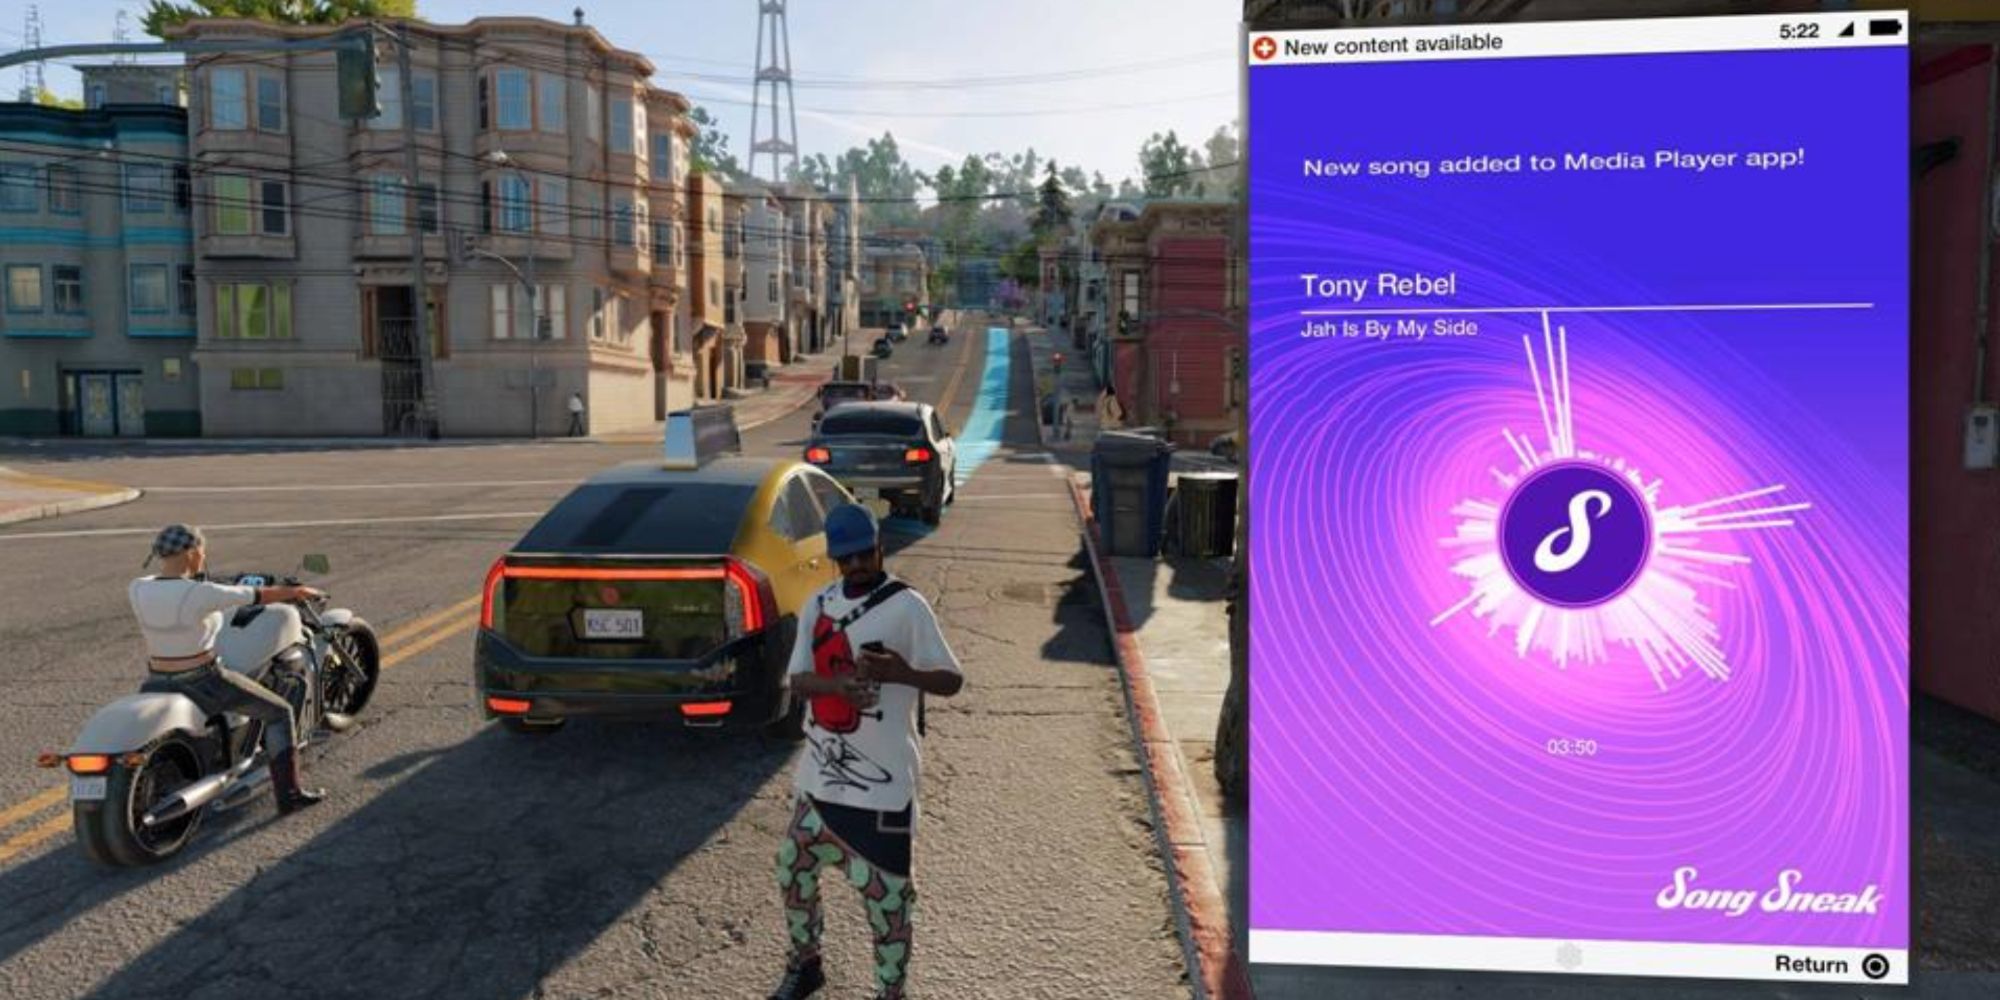 Marcus using the SongSneak app in Watch Dogs 2